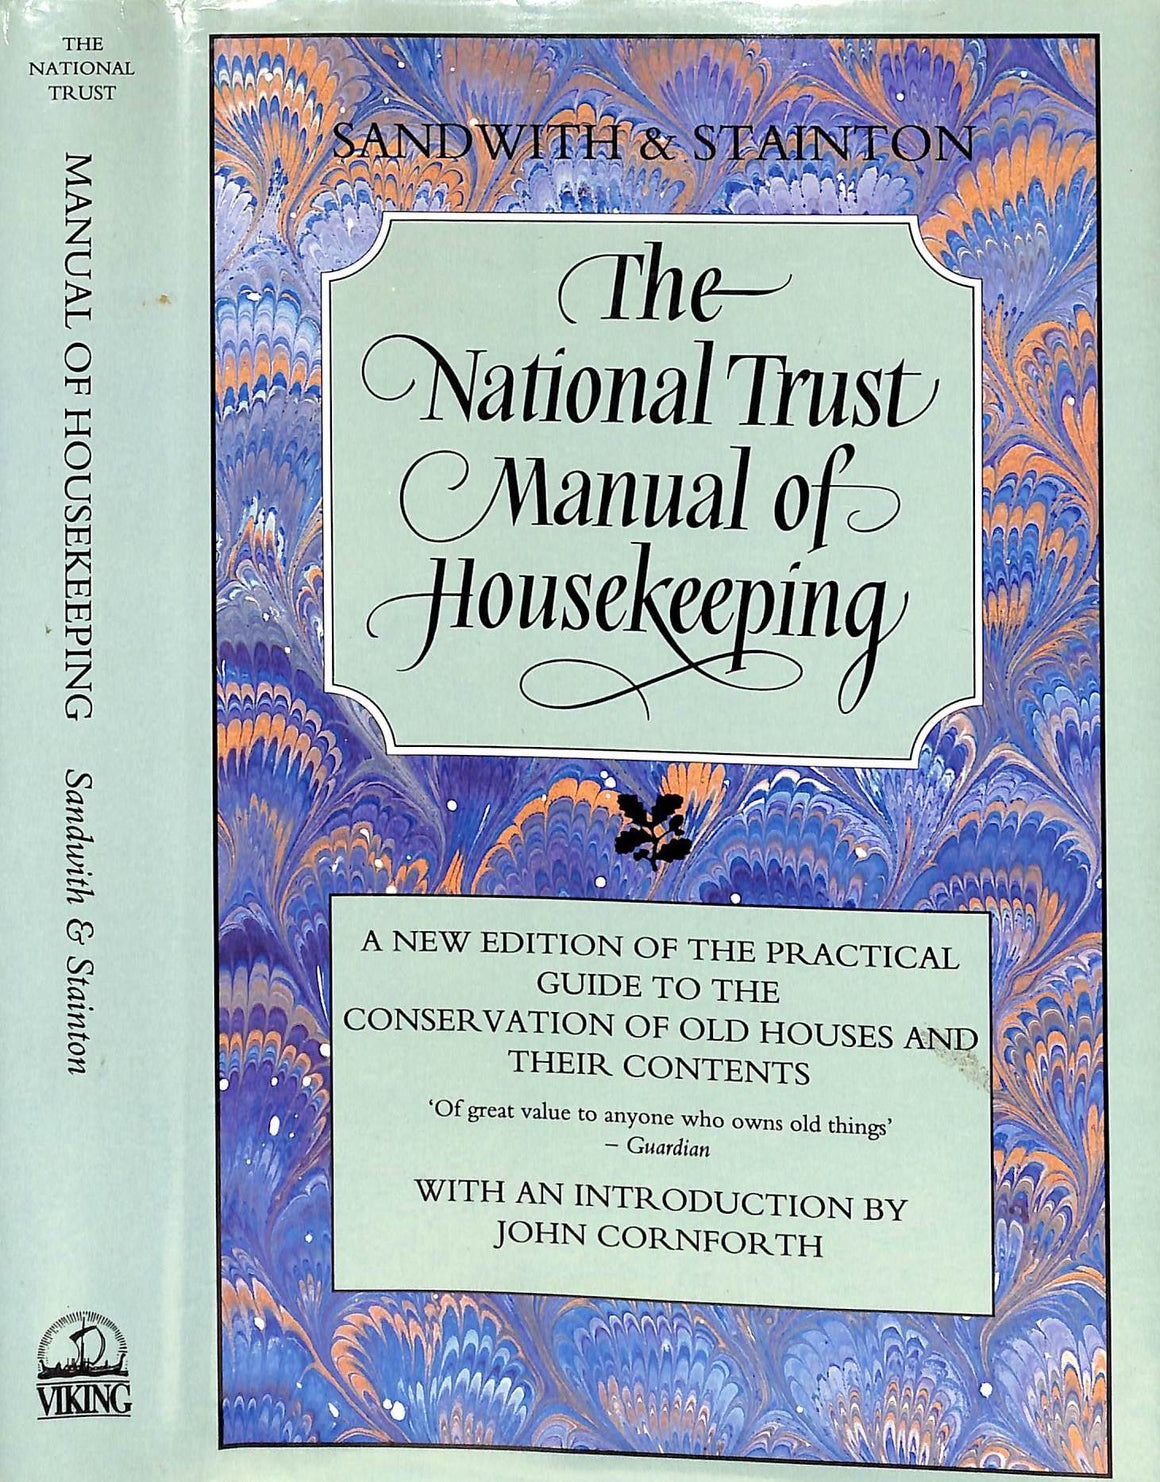 "The National Trust Manual Of Housekeeping" 1991 SANDWITH, Hermoine  and STAINTON, Sheila